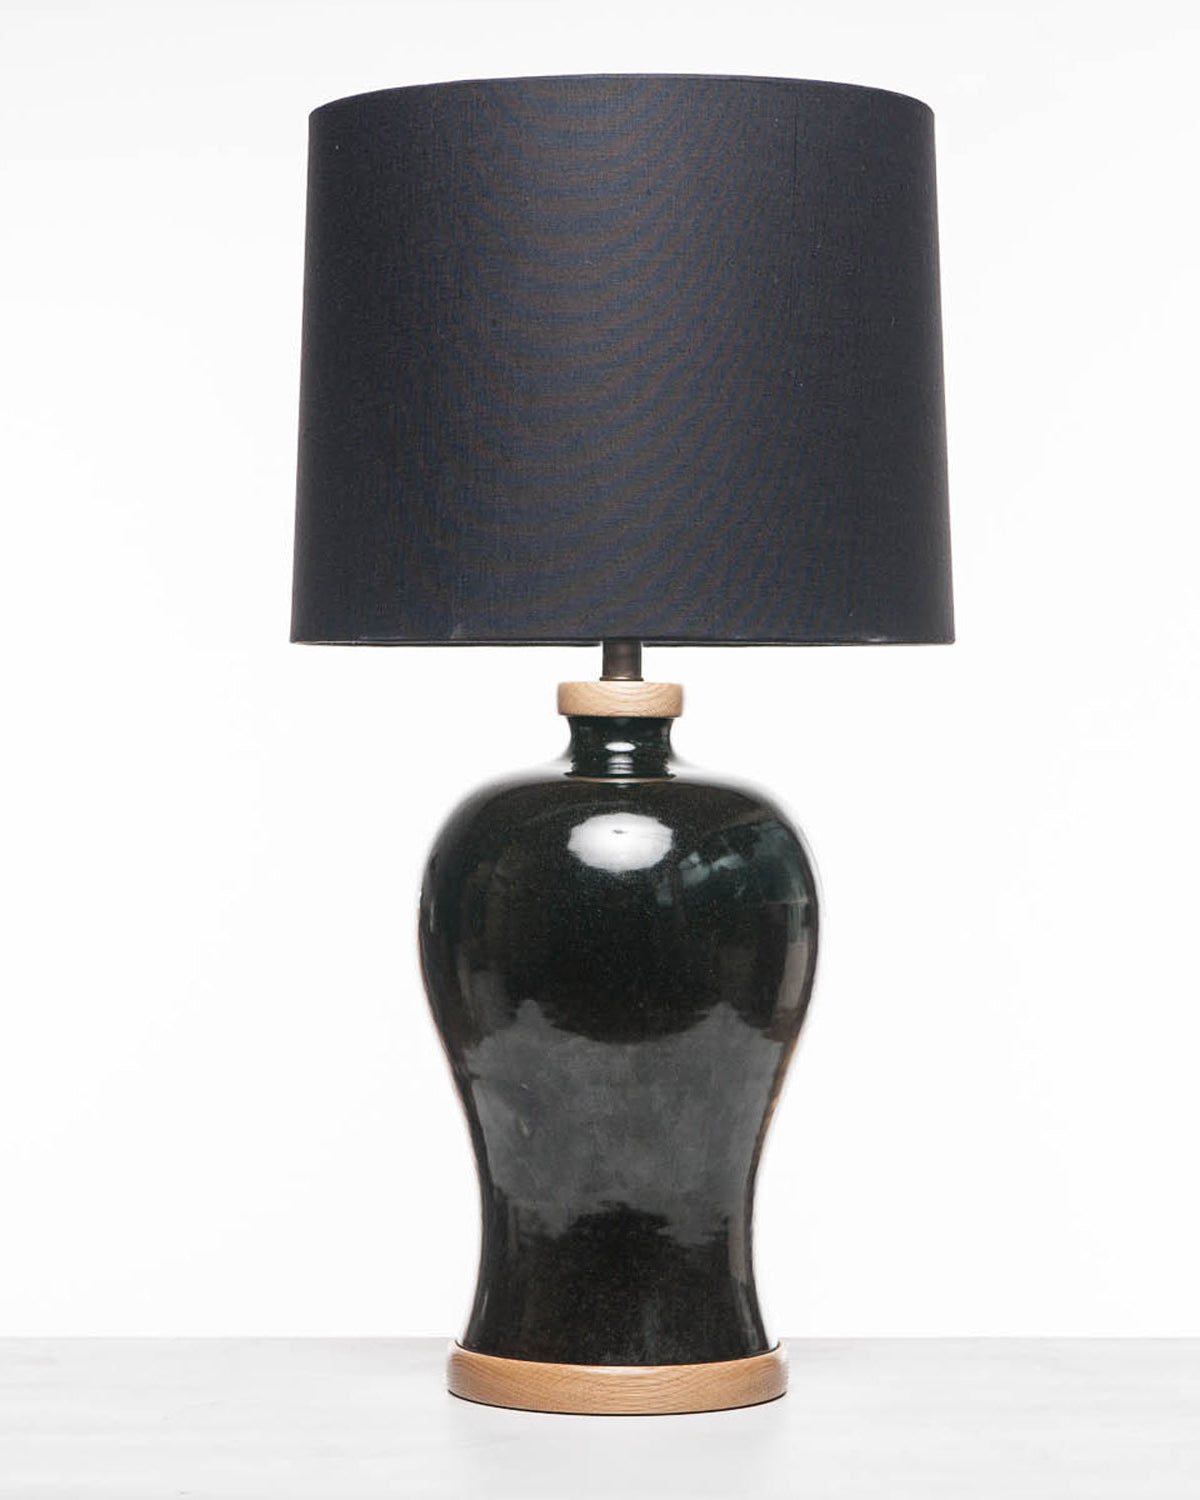 Lawrence & Scott Dashiell Table Lamp in Black